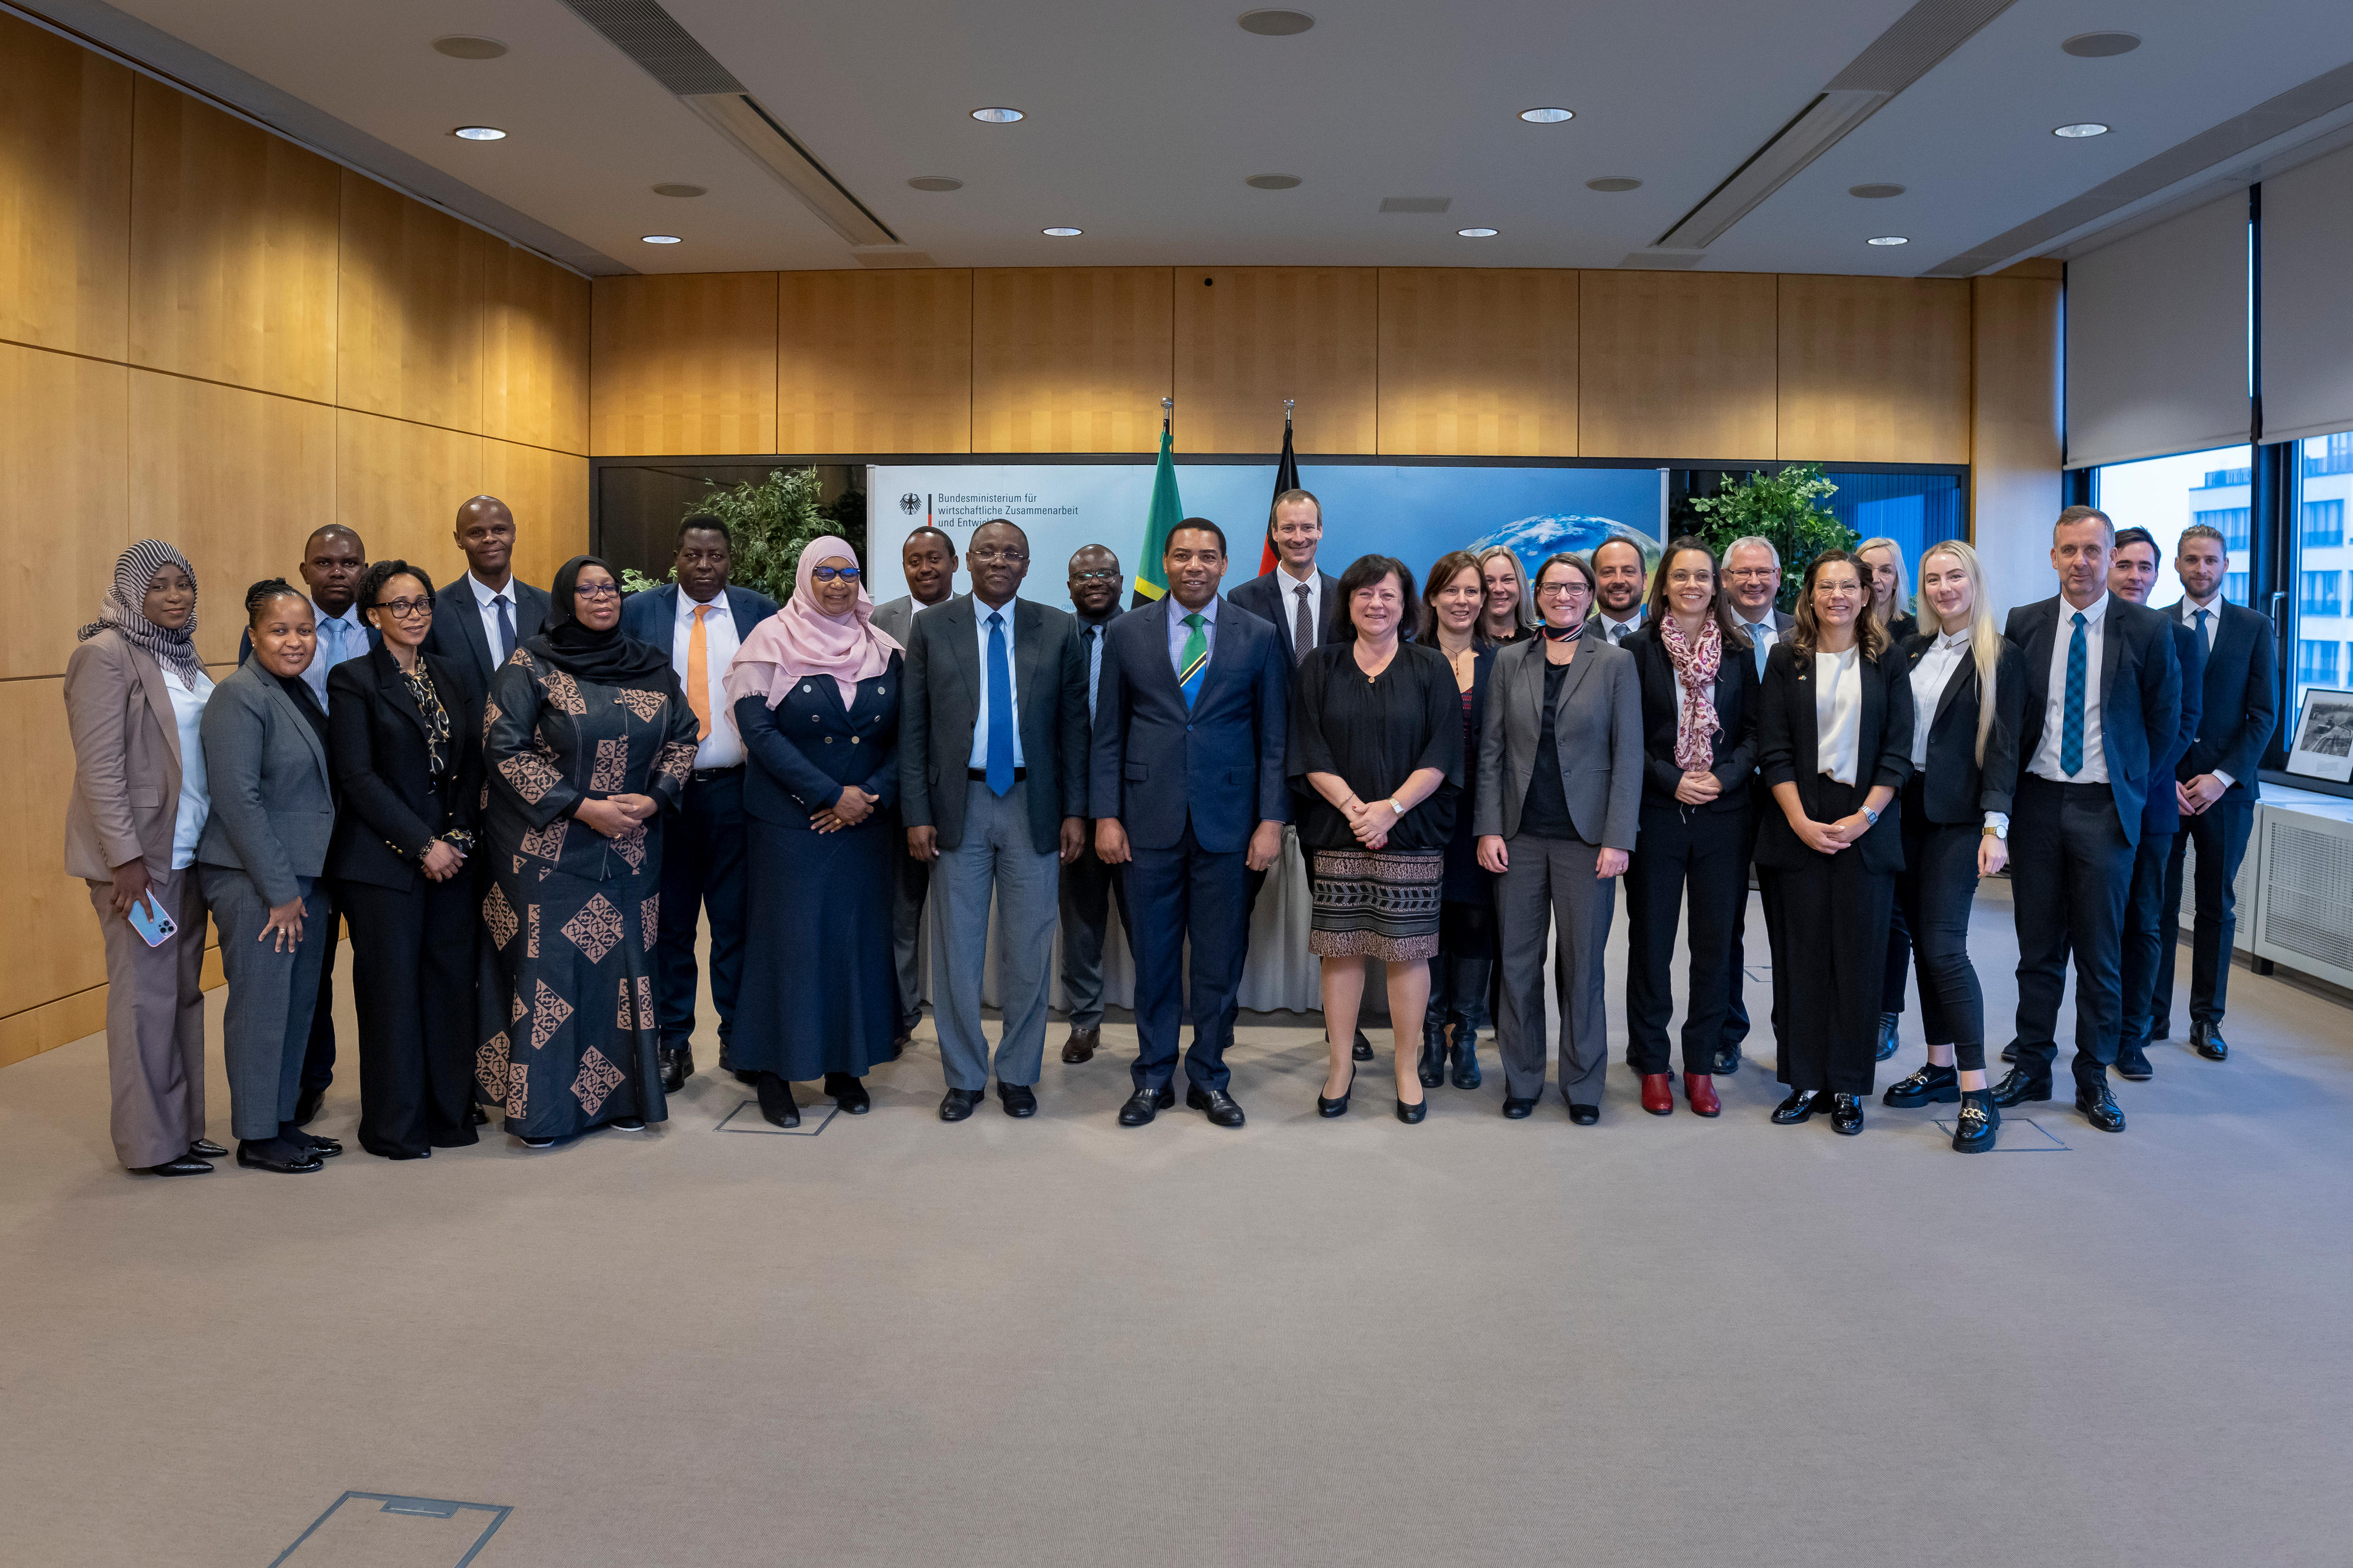 The Tanzanian delegation led by the Tanzanian Minister of Finance, Dr Mwigulu Nchemba, and the German delegation led by the Parliamentary State Secretary at the BMZ, Dr Bärbel Kofler, at the German-Tanzanian intergovernmental negotiations at the BMZ in Berlin on 16 November 2022.